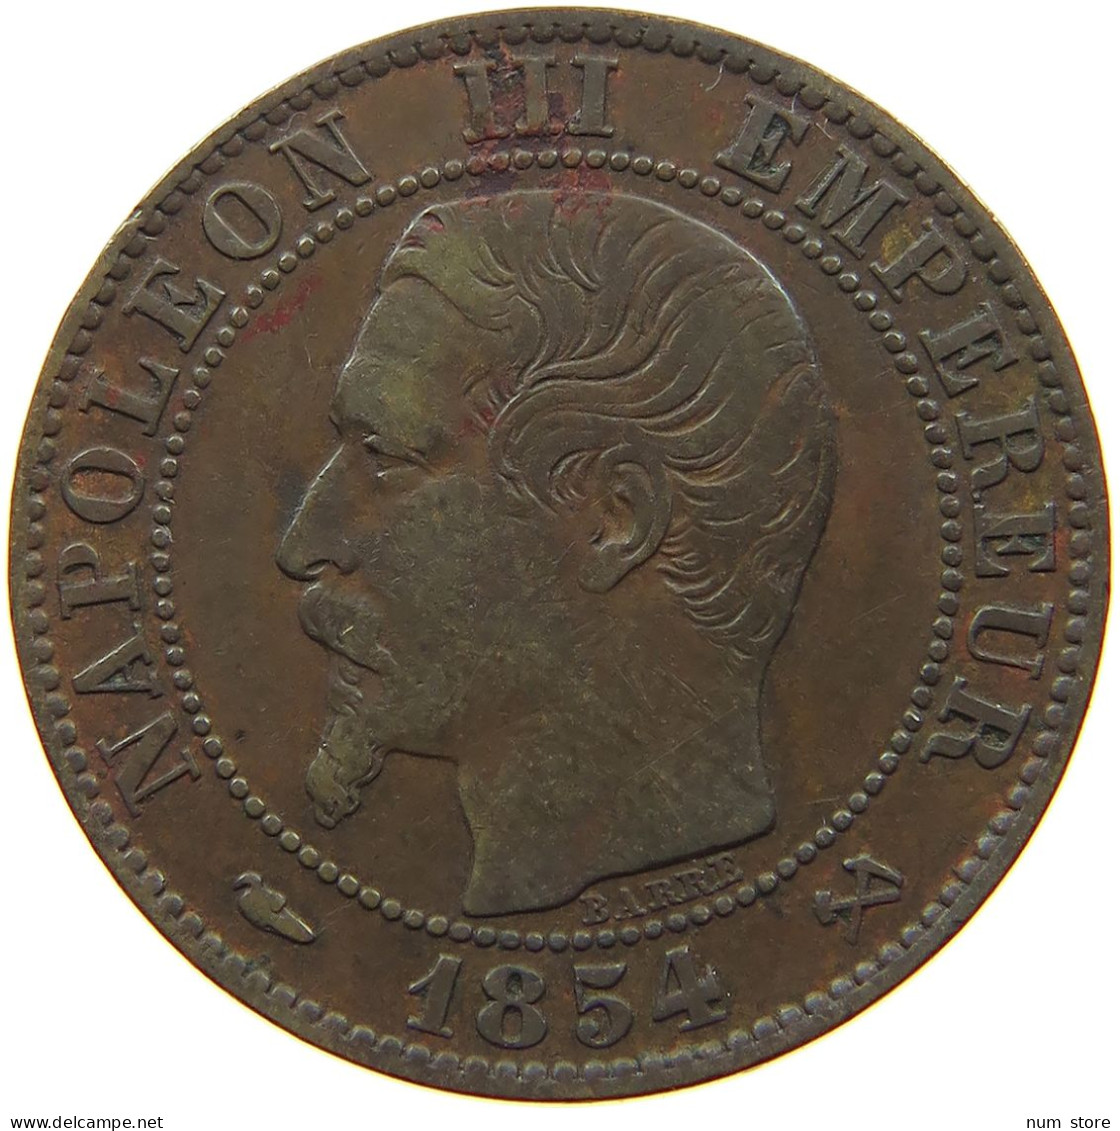 FRANCE 5 CENTIMES 1854 B Napoleon III. (1852-1870) #a095 0197 - 5 Centimes